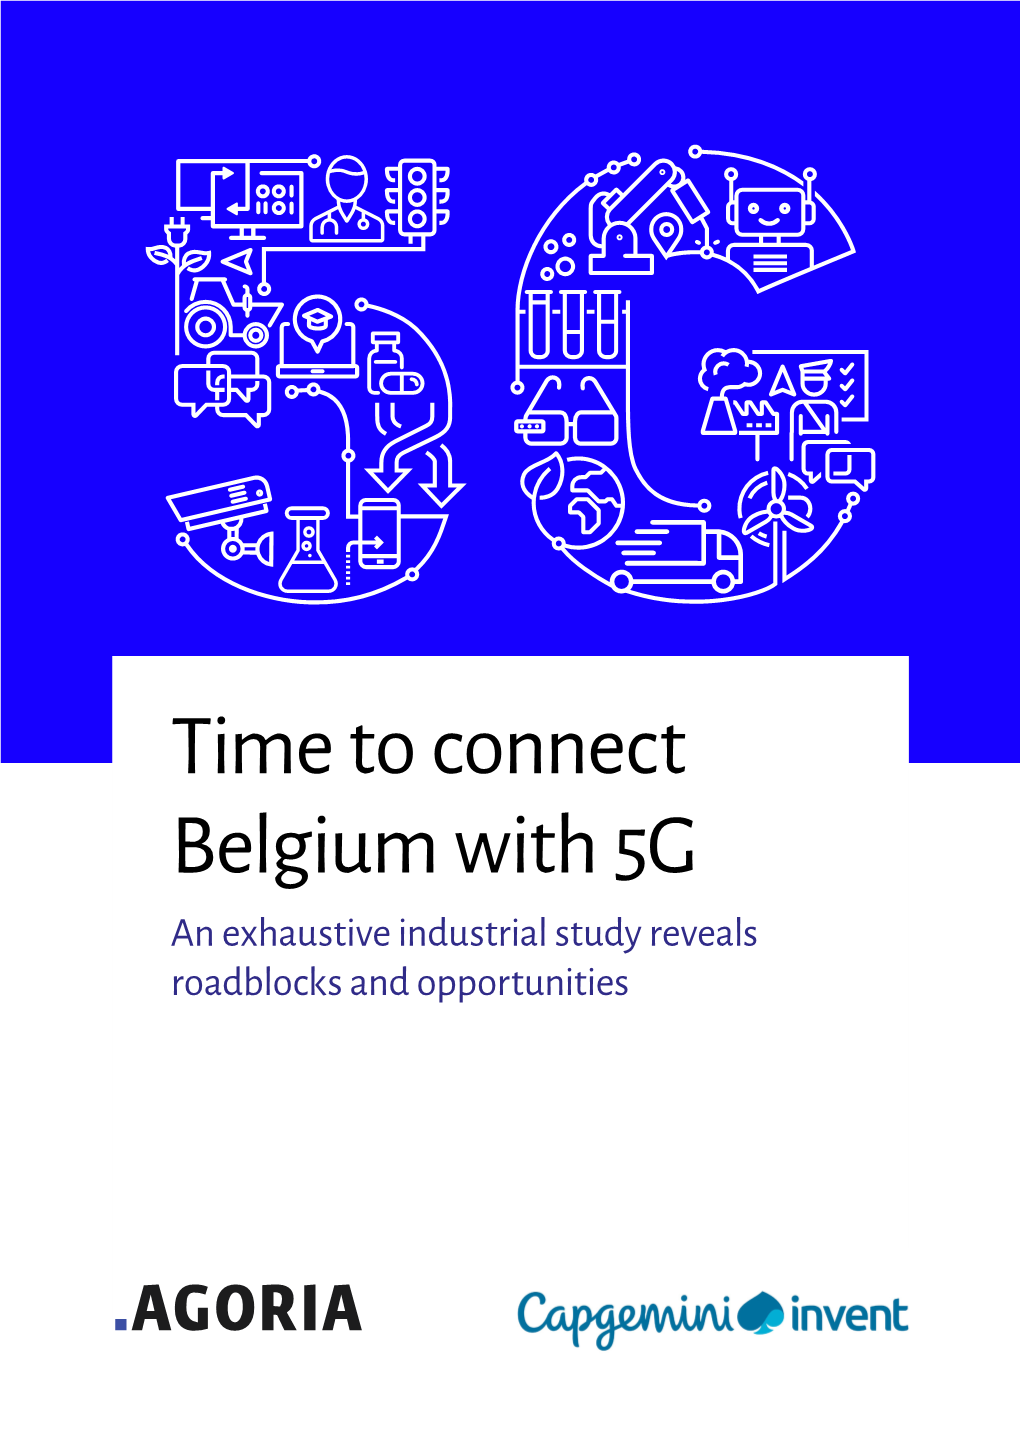 Time to Connect Belgium with 5G an Exhaustive Industrial Study Reveals Roadblocks and Opportunities 2 | Time to Connect Belgium with 5G Contents